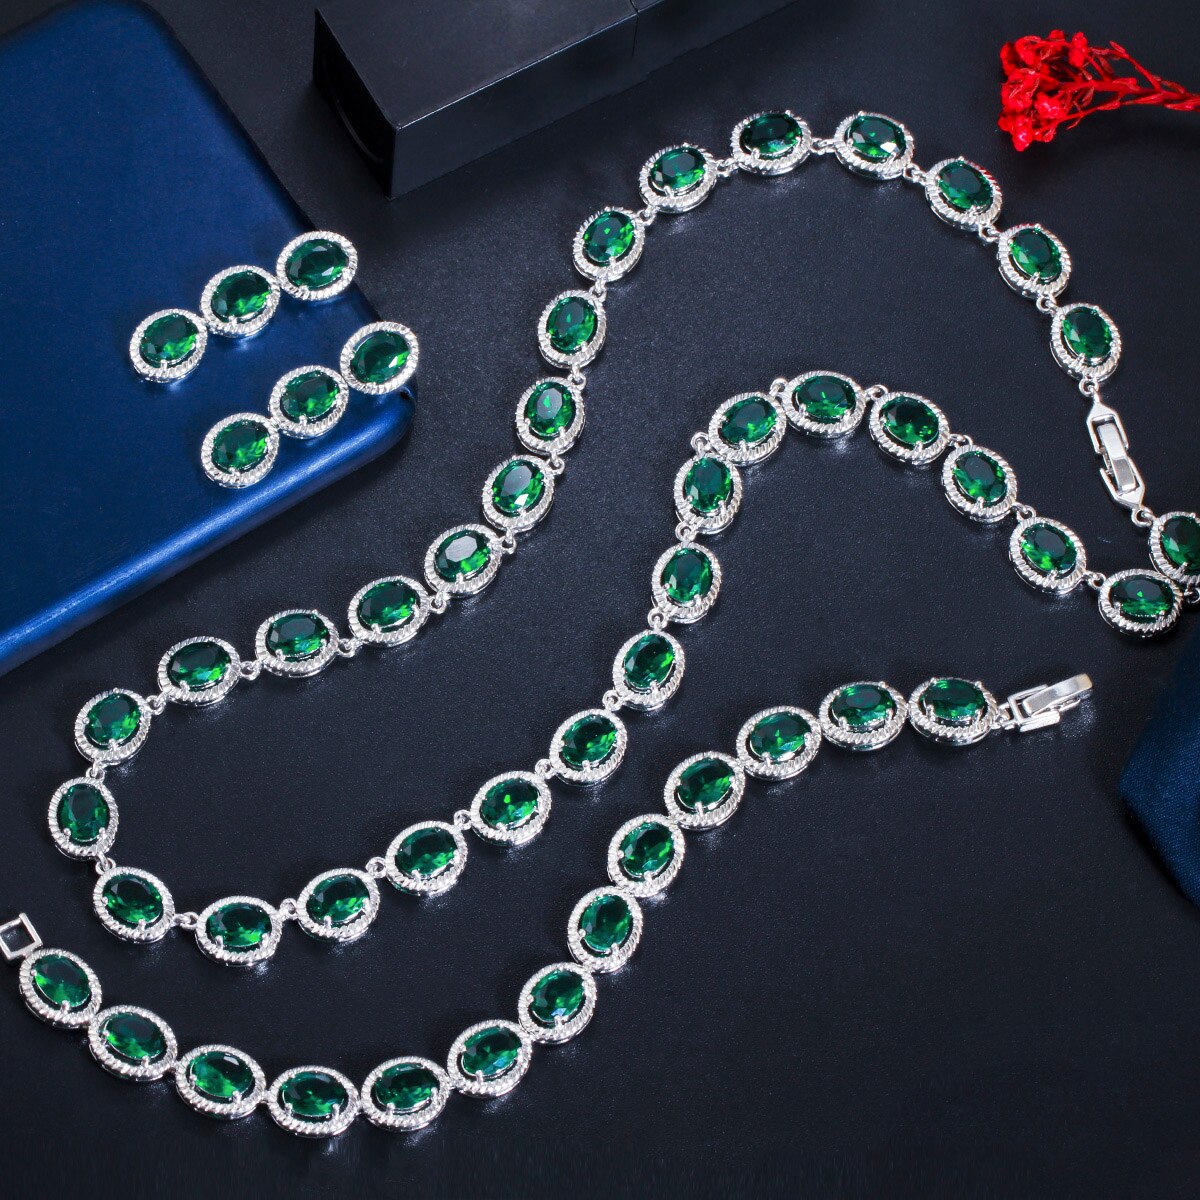 ThreeGraces-3pcs-High-Quality-Green-Cubic-Zirconia-Classic-Silver-Color-African-Women-Wedding-Party--1005001603752897-4